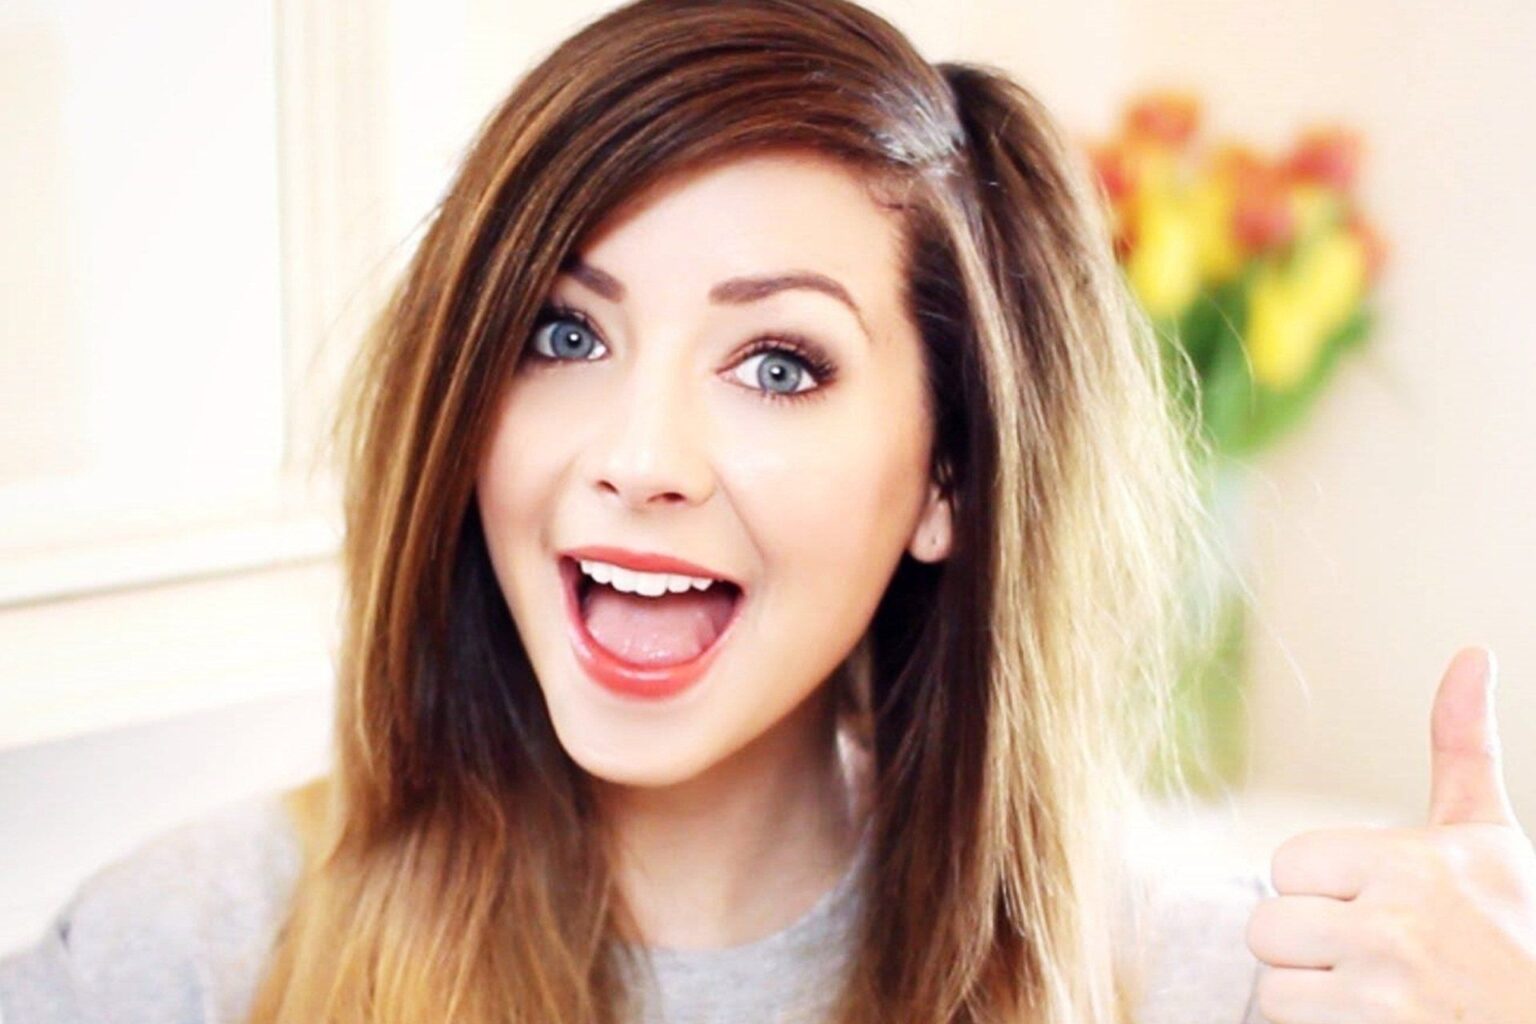 Zoe Sugg, also known as Zoella, has been known as a smart businesswoman & vlogger on YouTube. Find out more now.